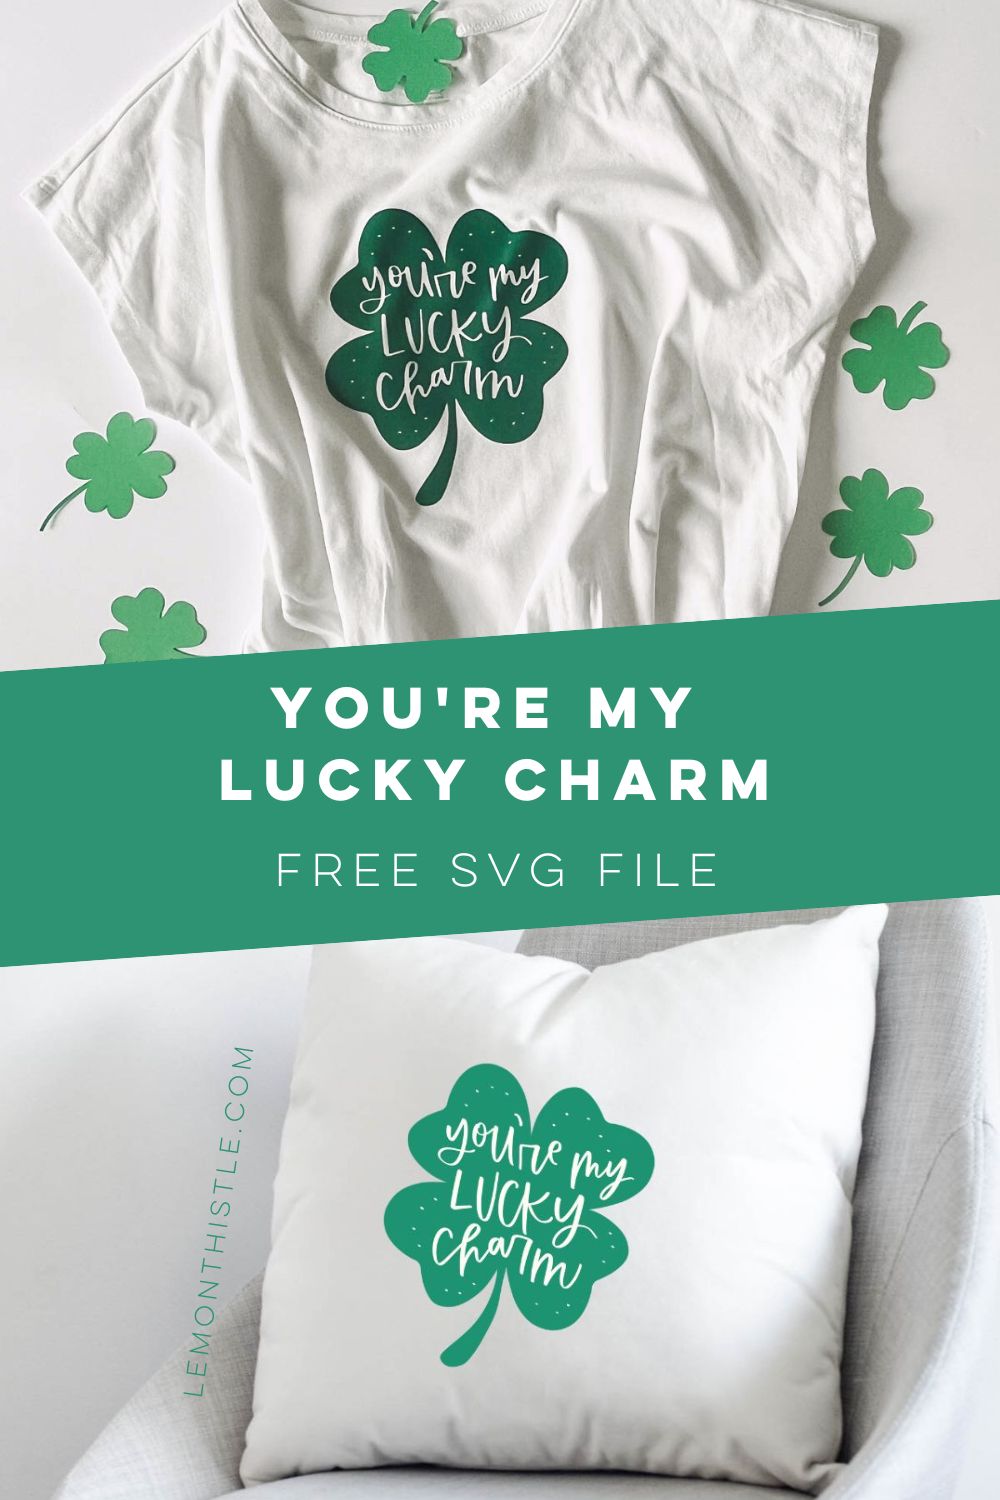 'you're my lucky charm' hand lettered on a shamrock ironed on to a t-shirt and pillow with text over that reads 'you're my lucky charm free SVG files'